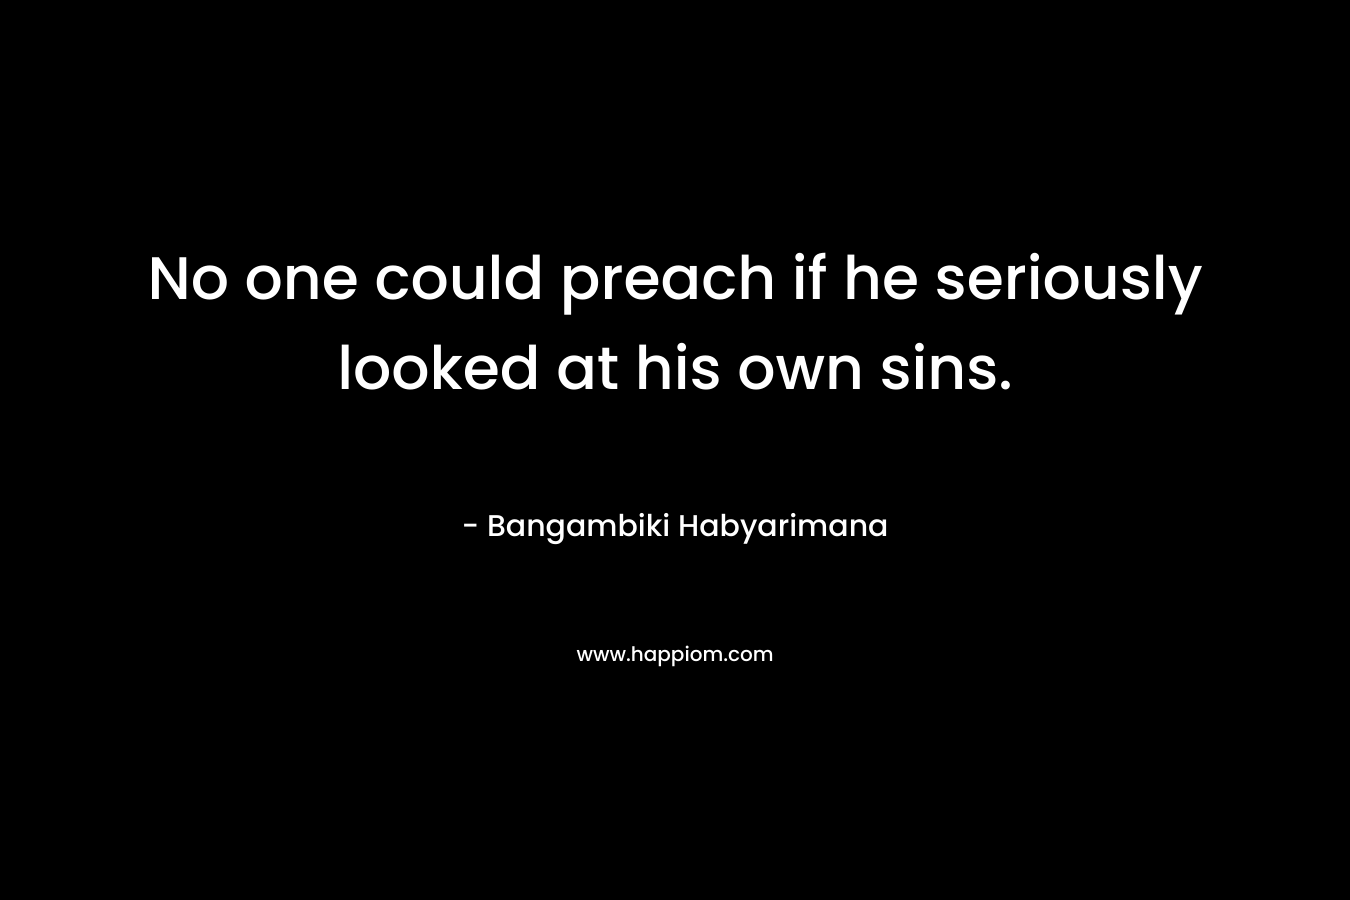 No one could preach if he seriously looked at his own sins. – Bangambiki Habyarimana